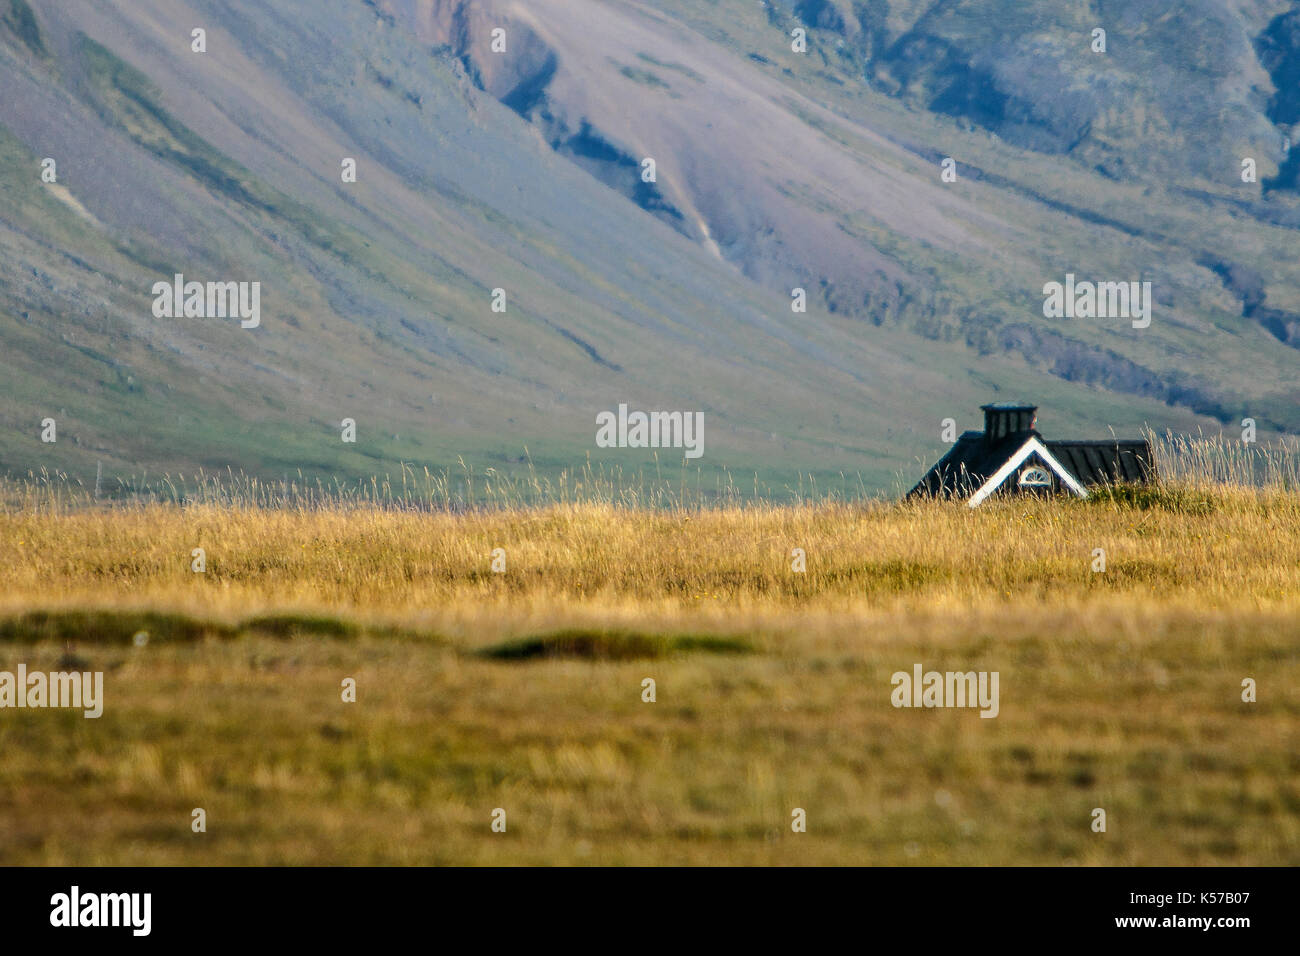 Mountainous landscape with a rural house visible above the field in foreground. Stock Photo